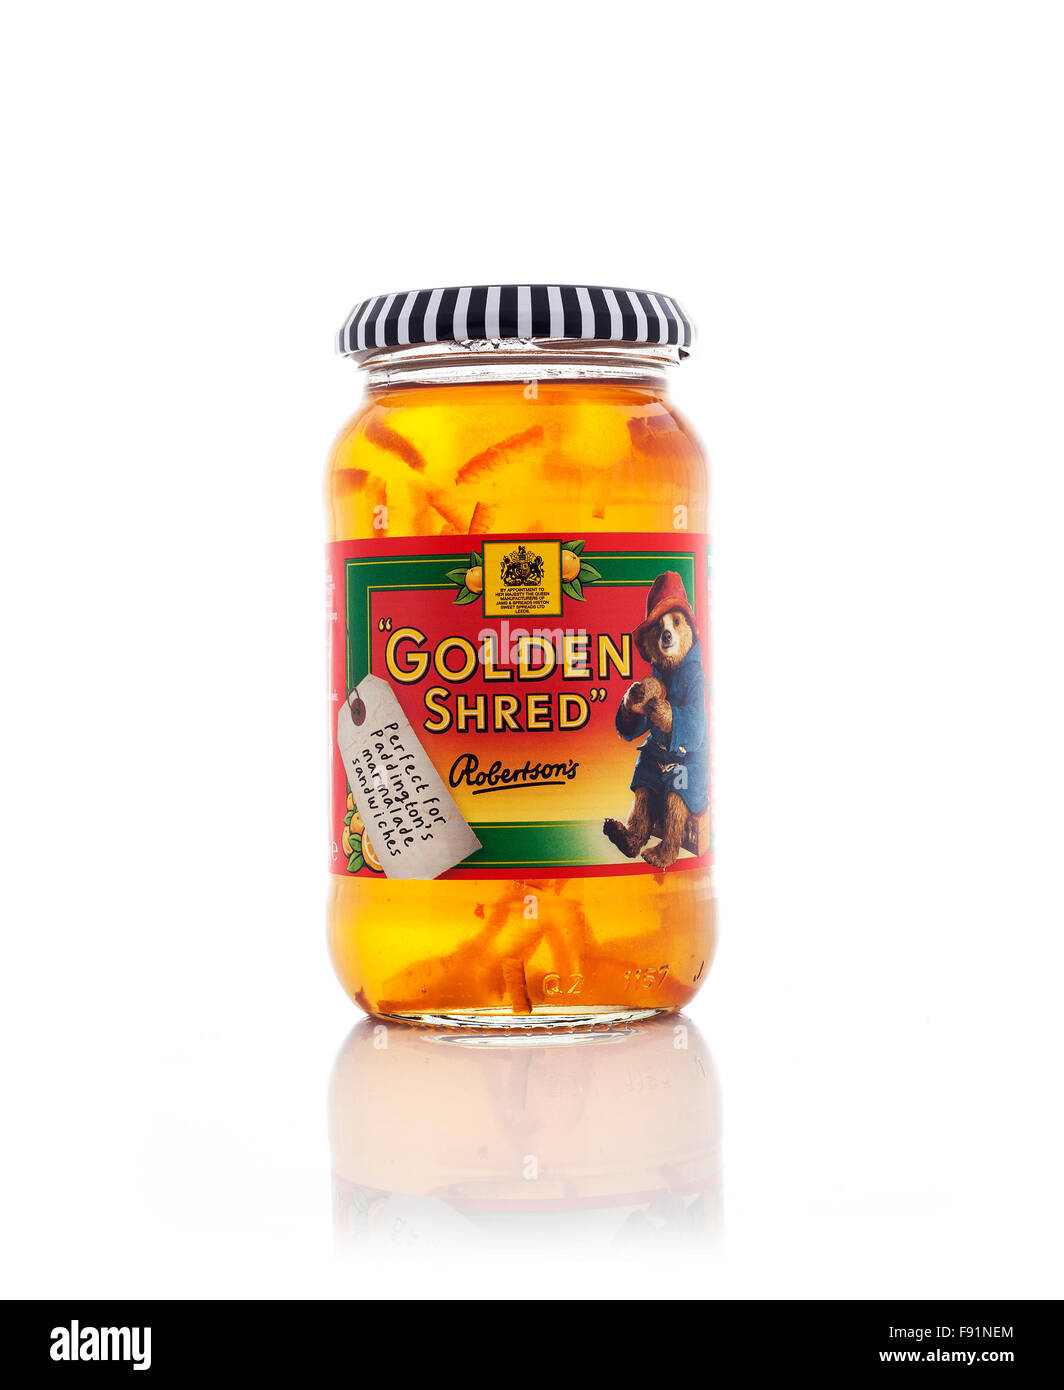 Jar Of Robertsons Golden Shred Marmalade on a White Background Stock Photo